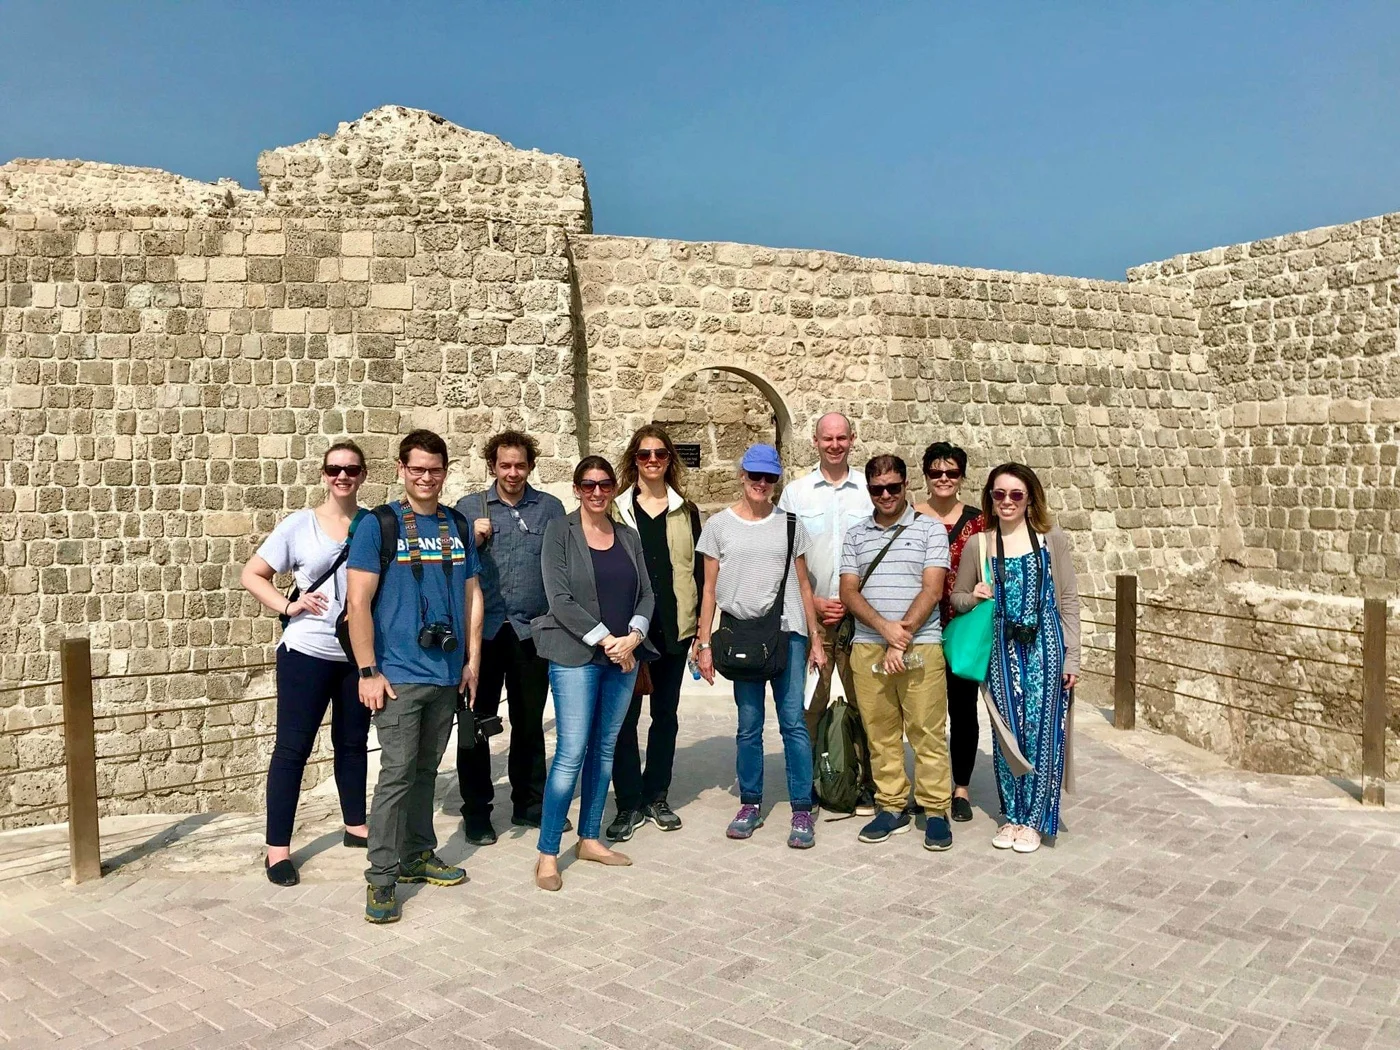 A visit to the Dilmun civilization site in Bahrain.